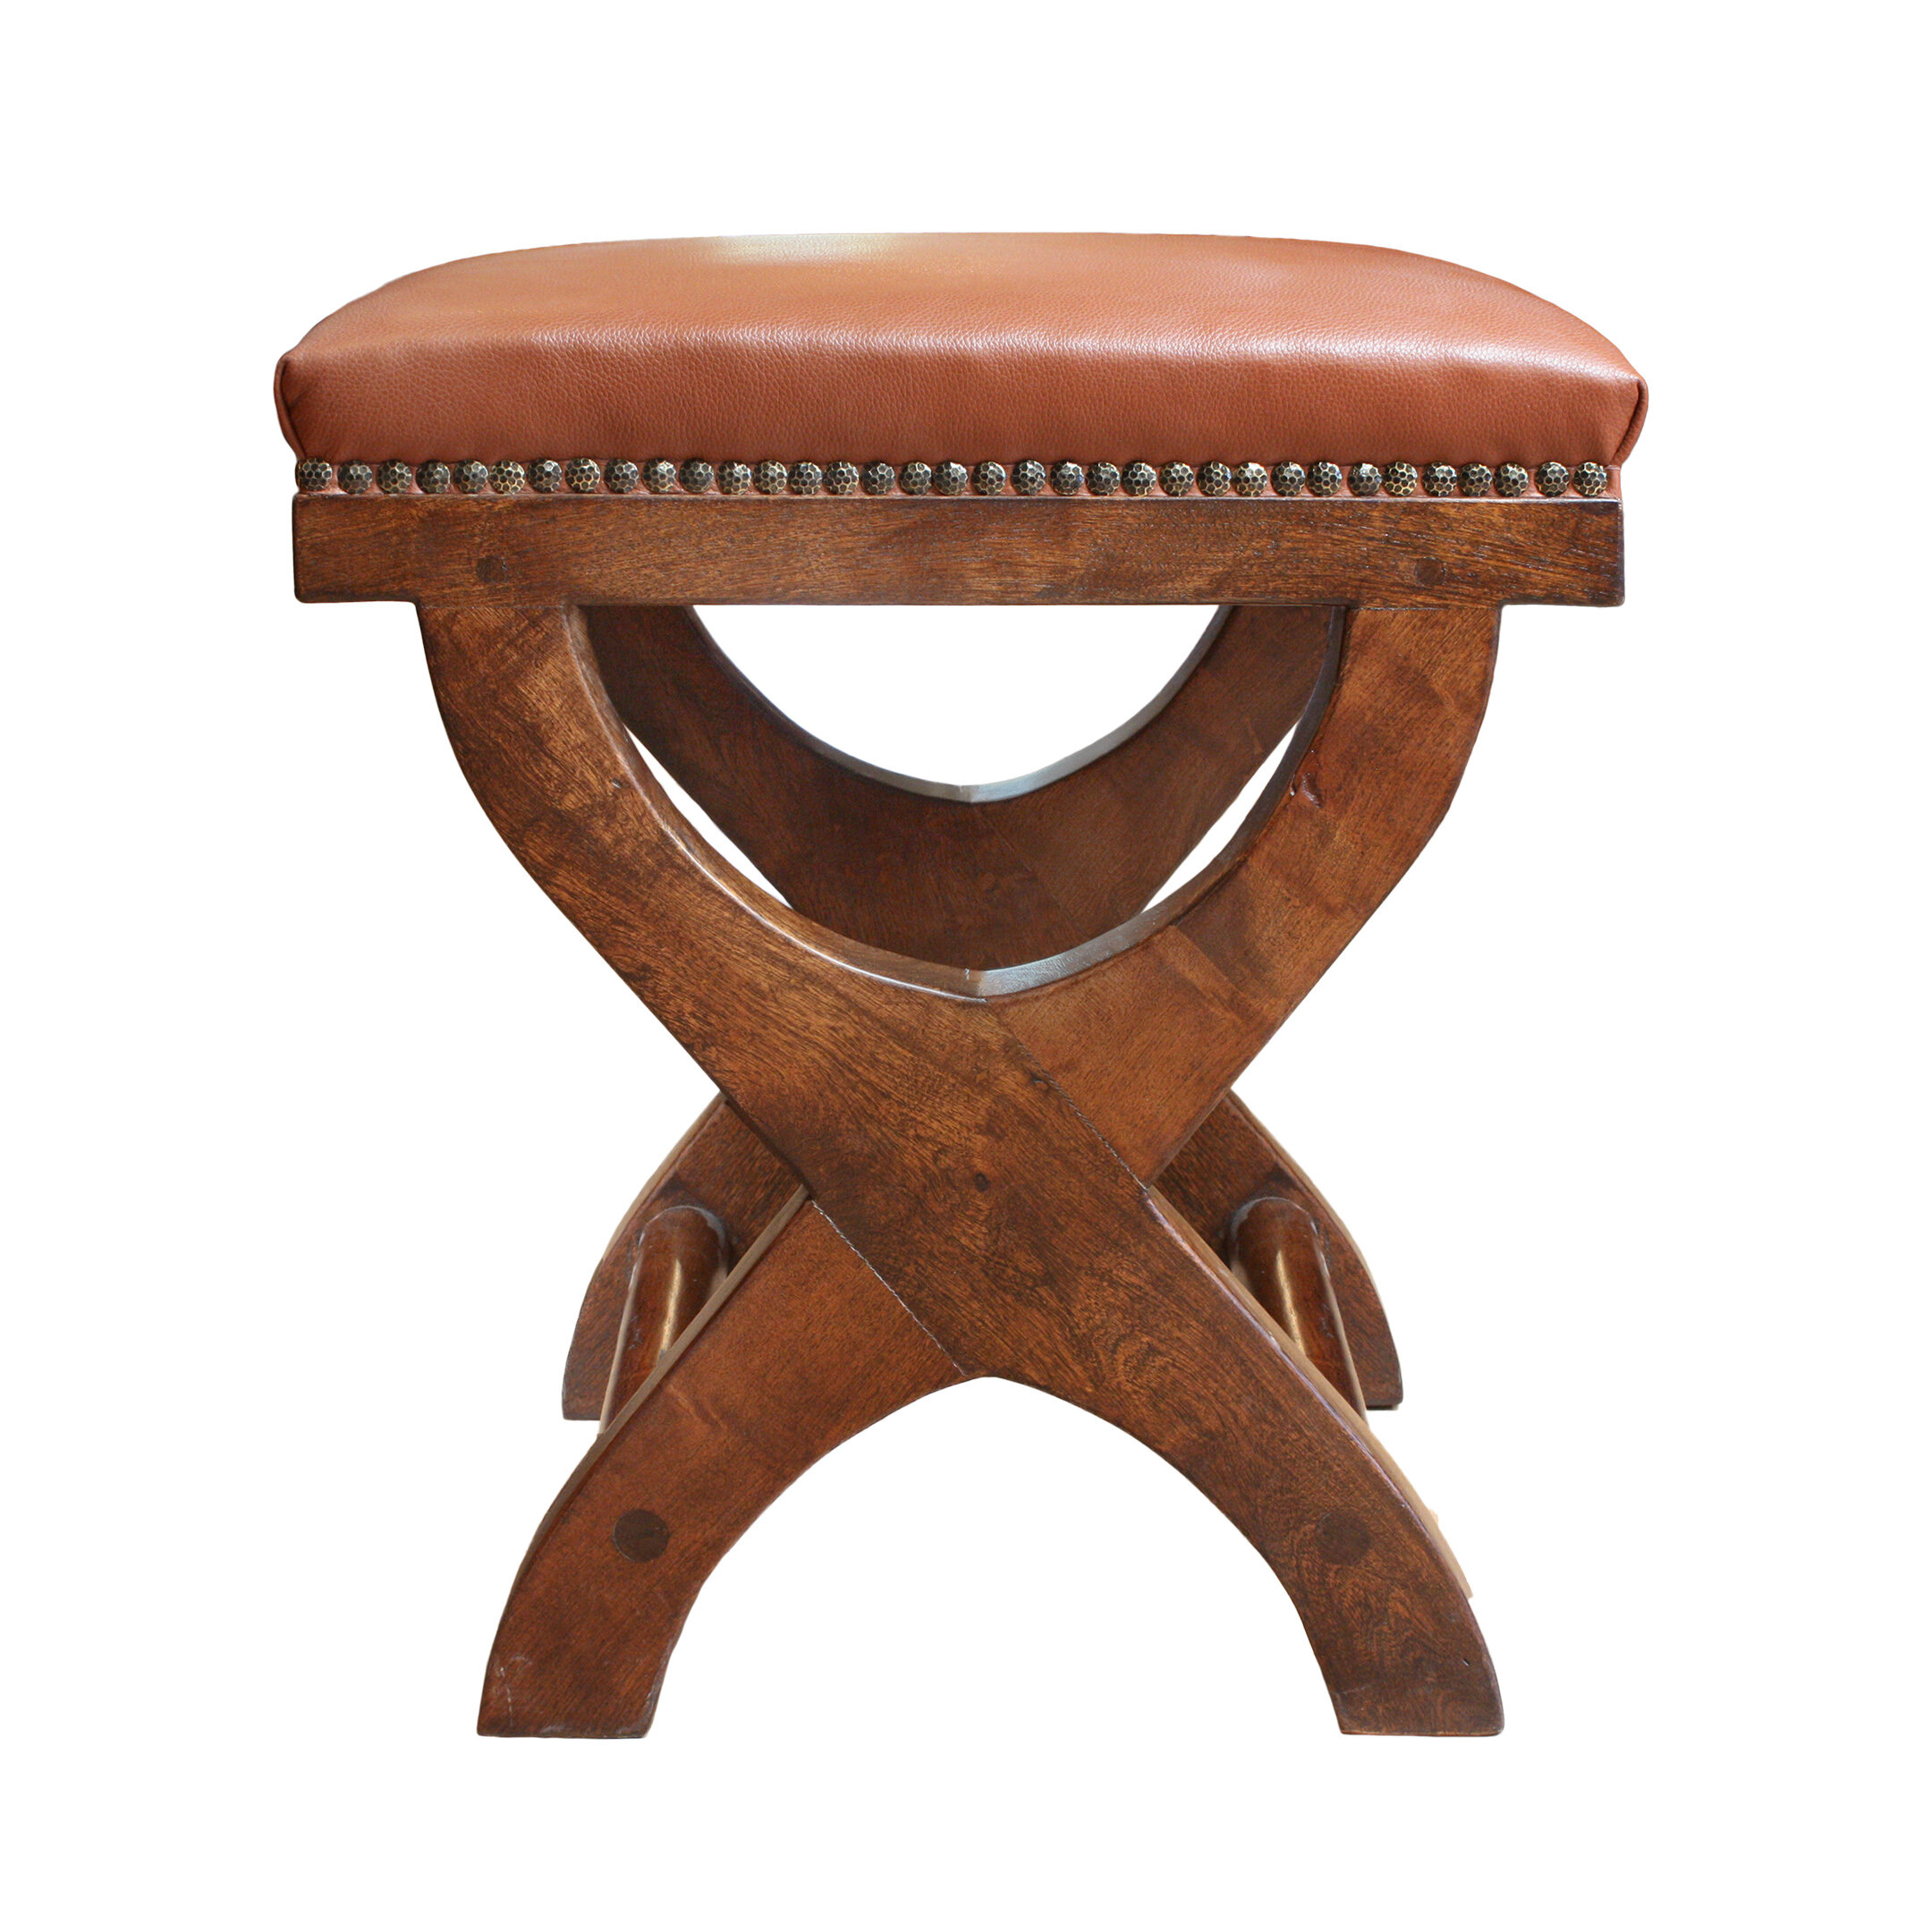 Mesquite Accent Chairs & Benches — Zocalo Casa + Jardin